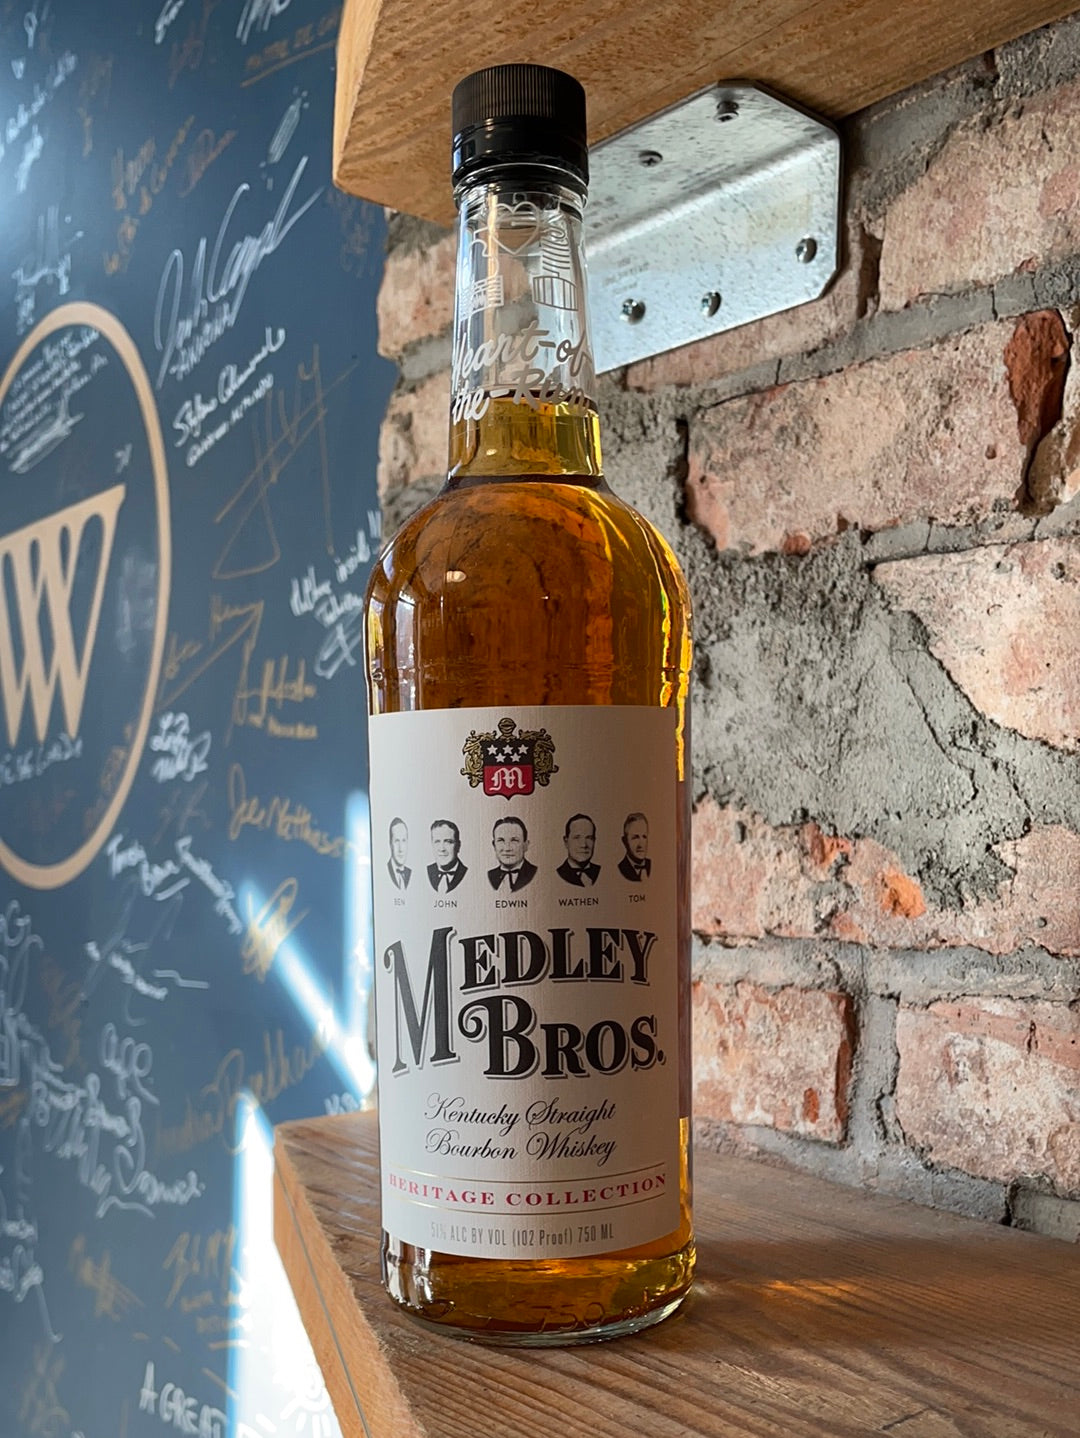 Medley Brothers Kentucky Straight Bourbon Whiskey 102 proof [NY STATE ONLY]